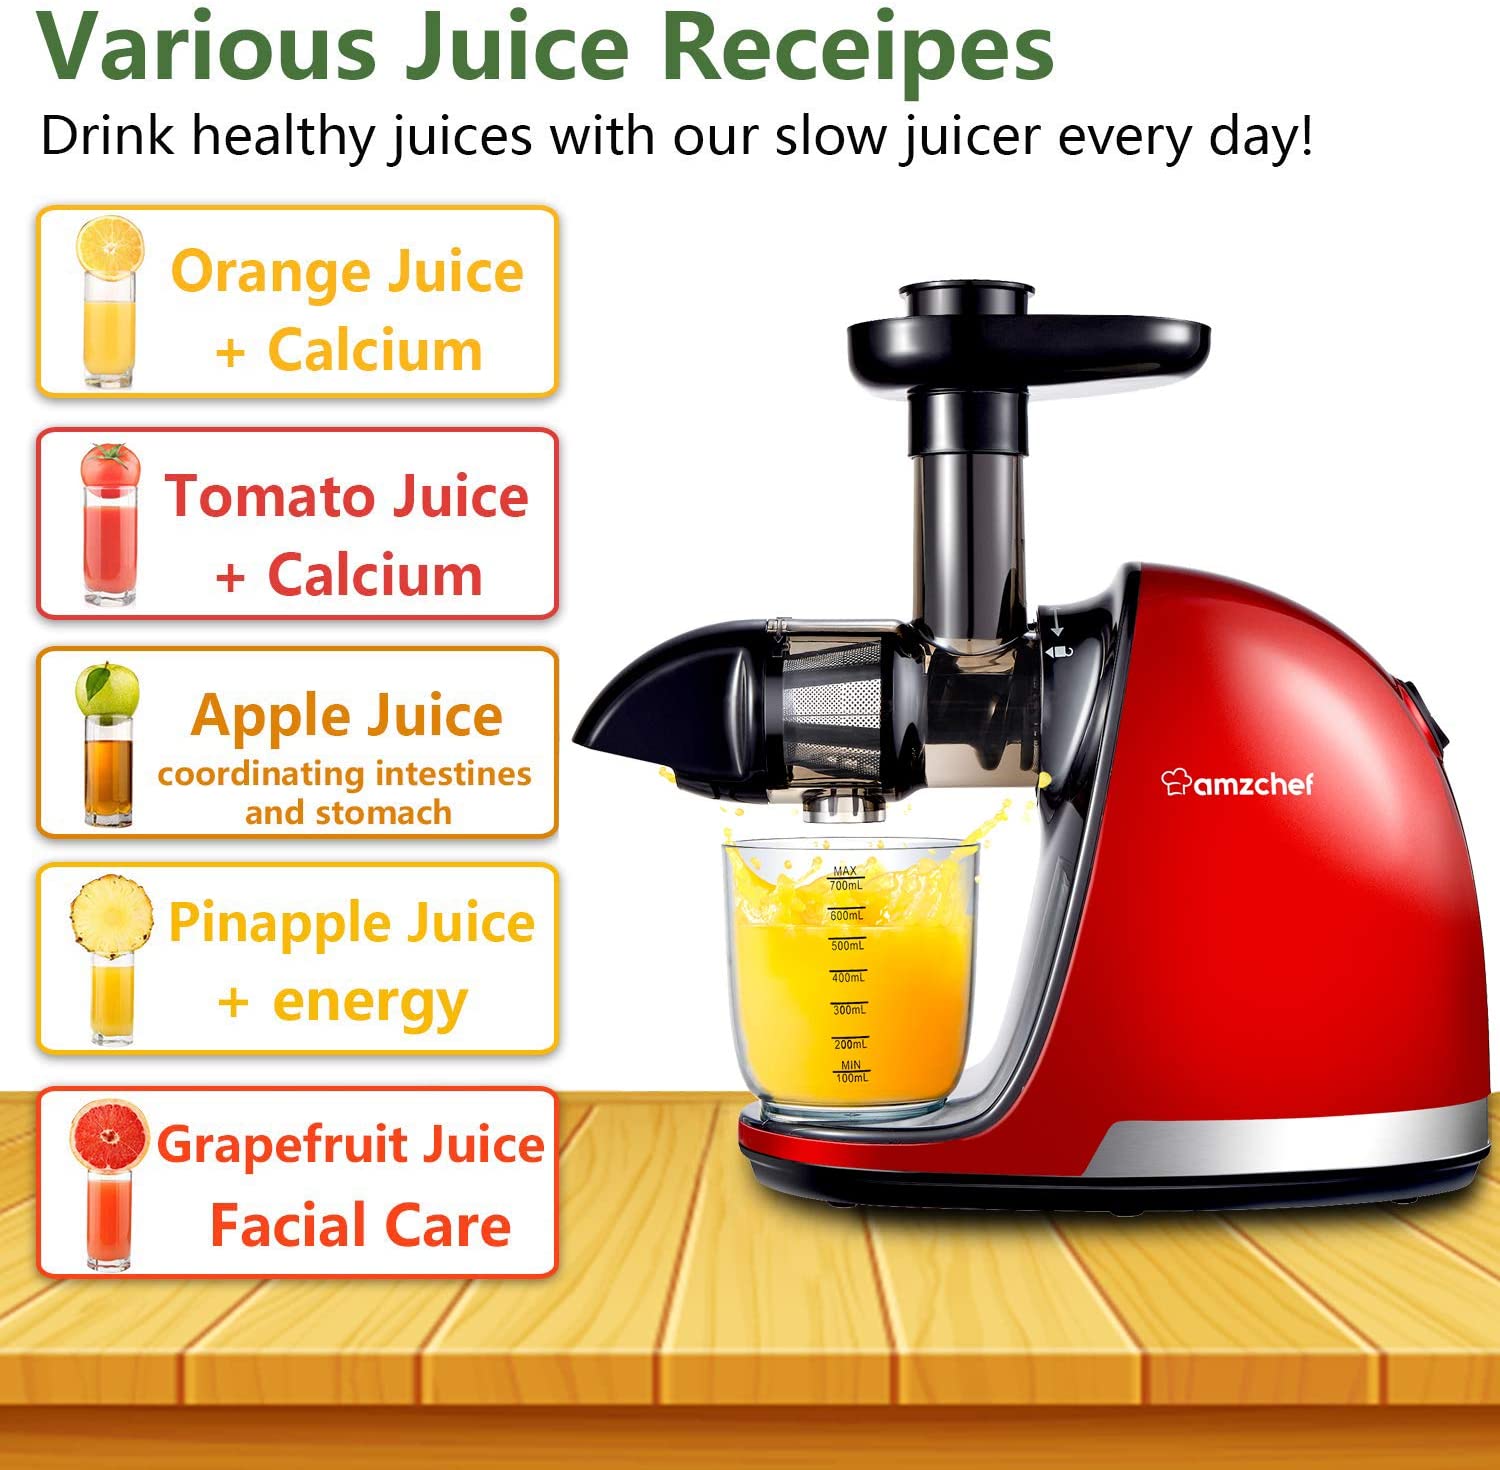 Slow Juicer Extractor, AMZCHEF Slow Masticating Juicer Machines with Quiet Motor, Juice Extractor with Reverse Function, Cold Press Juicer Easy to Clean with Brush for High Nutrient Fruit & Vegetable Juice